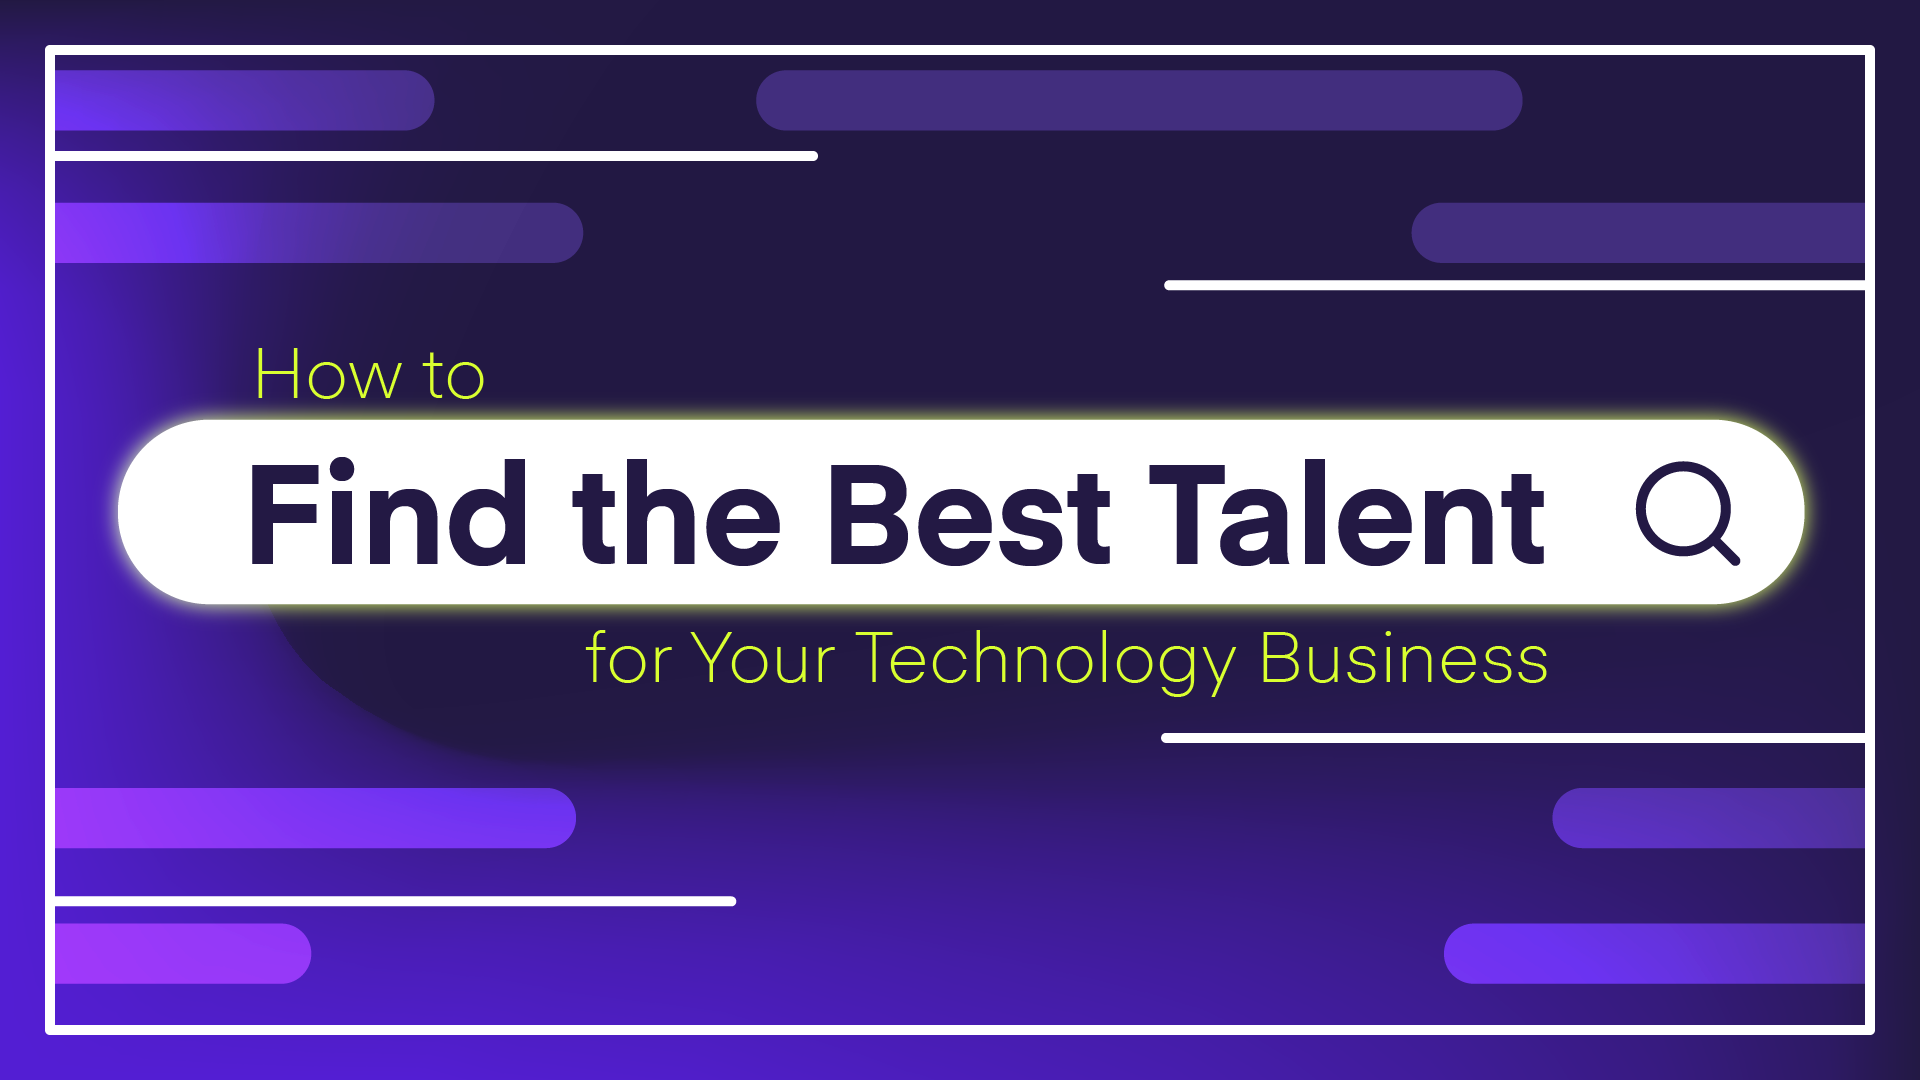 How to Find the Best Talent for Your Technology Business